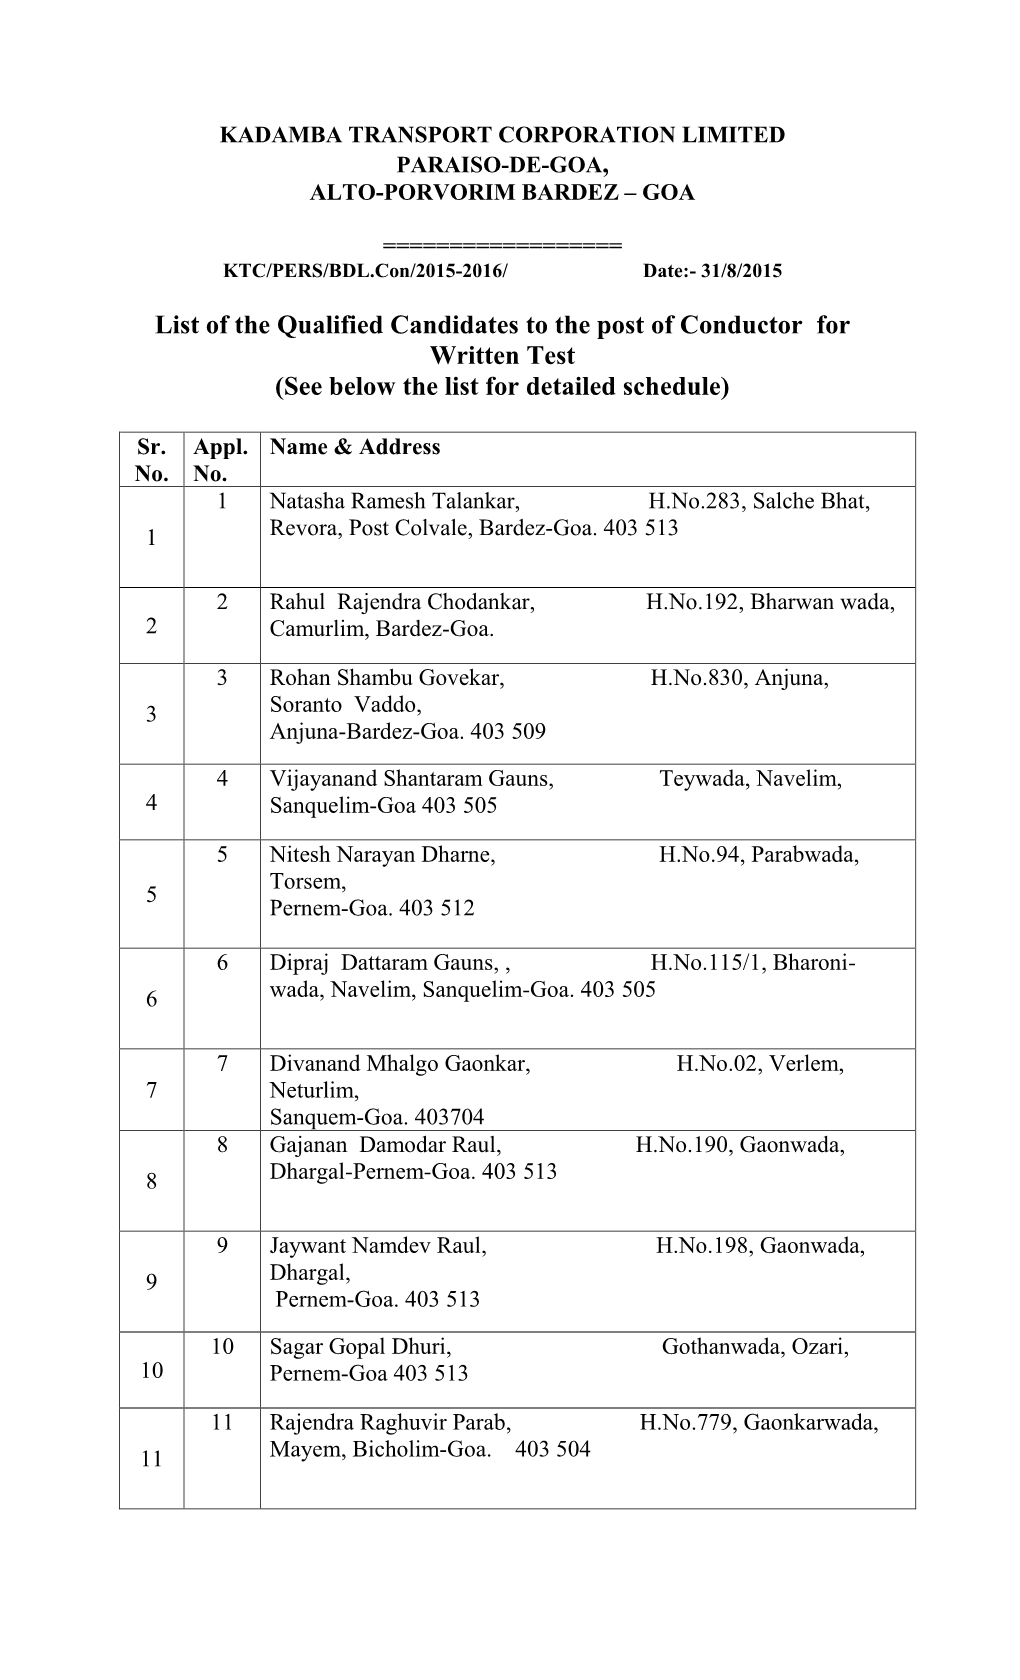 List of the Qualified Candidates to the Post of Conductor for Written Test (See Below the List for Detailed Schedule)